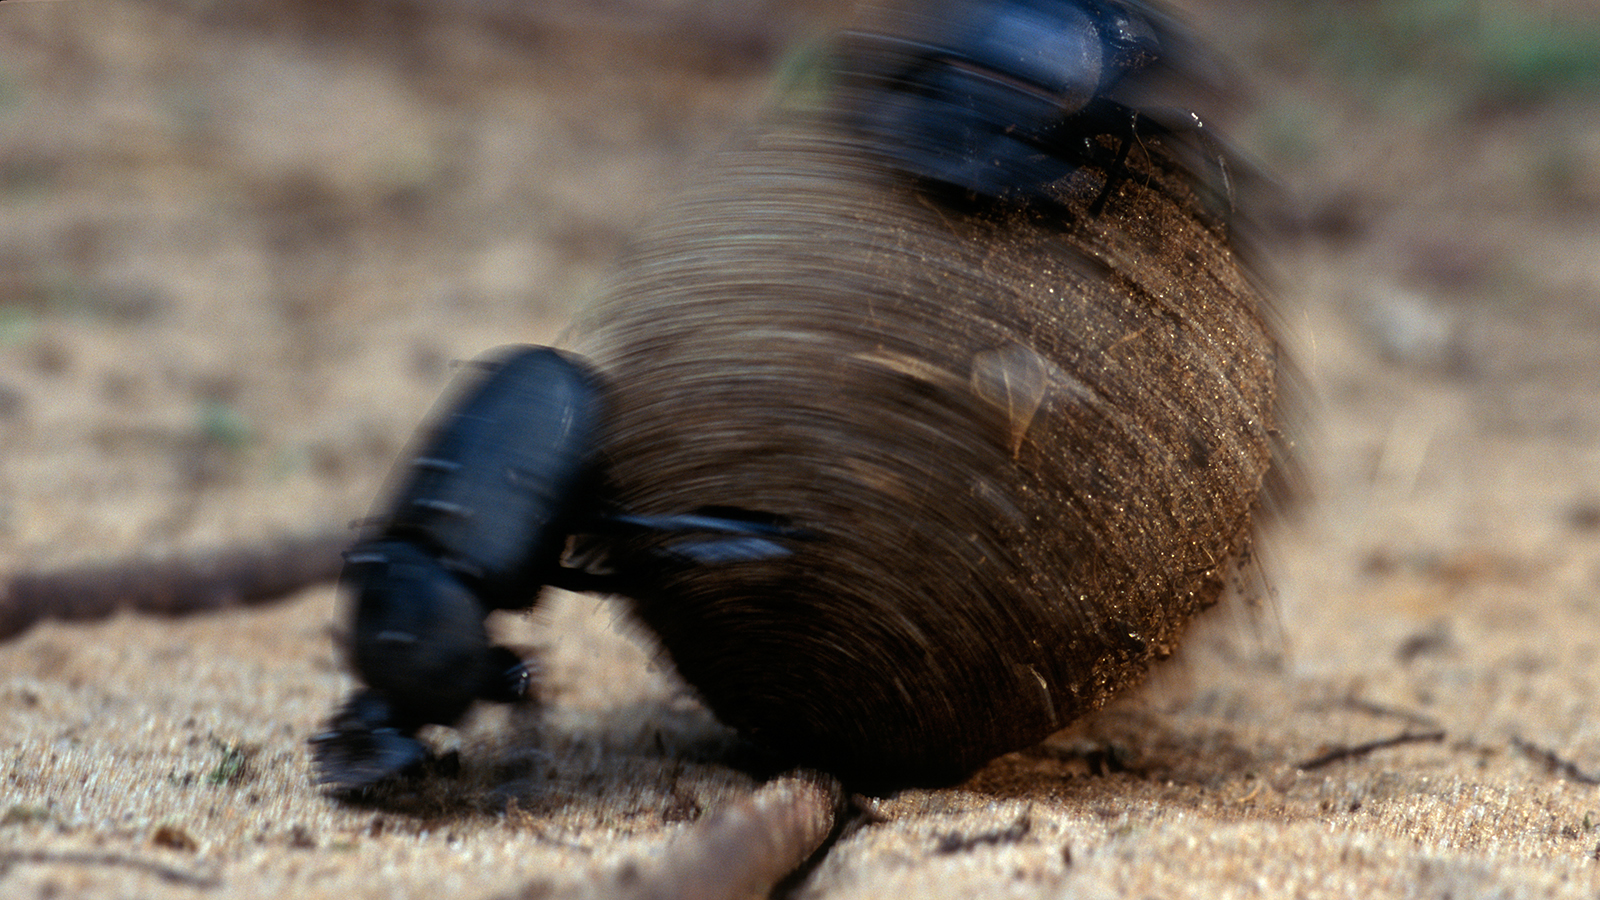 dung-beetle-ball-rolling